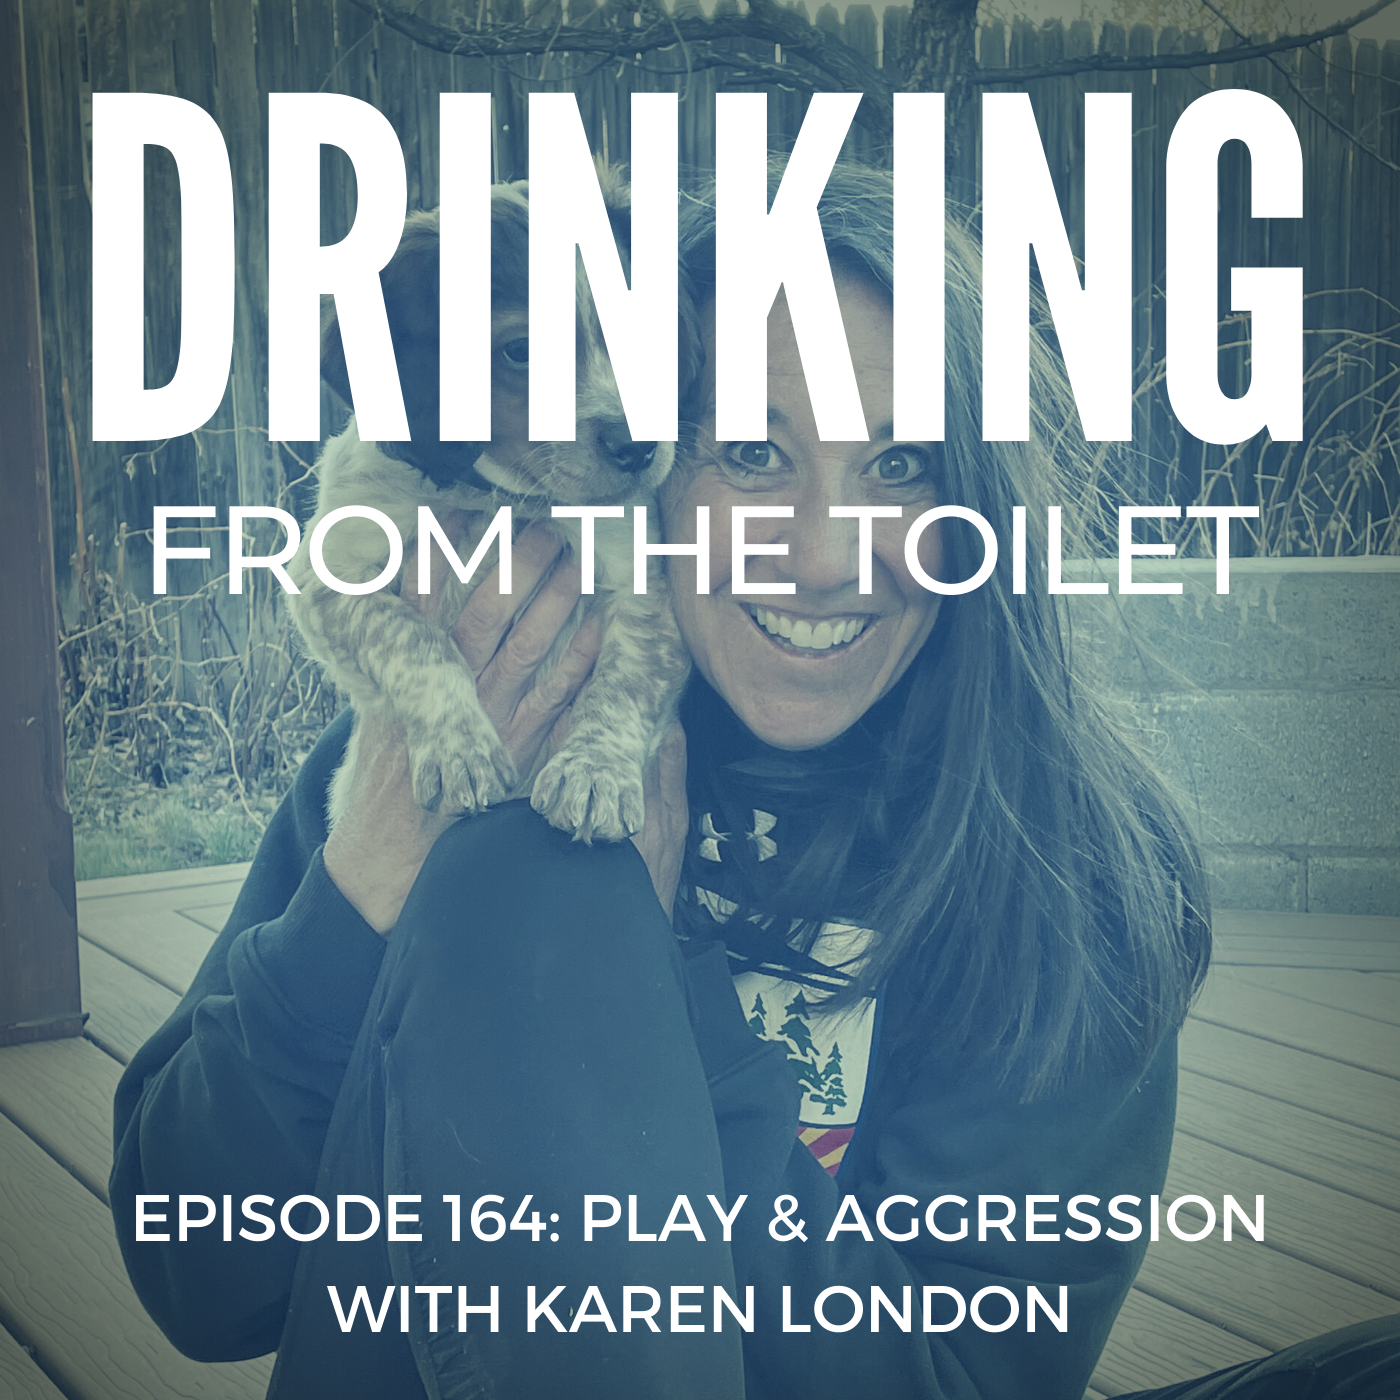 Podcast #164: Play & Aggression with Karen London